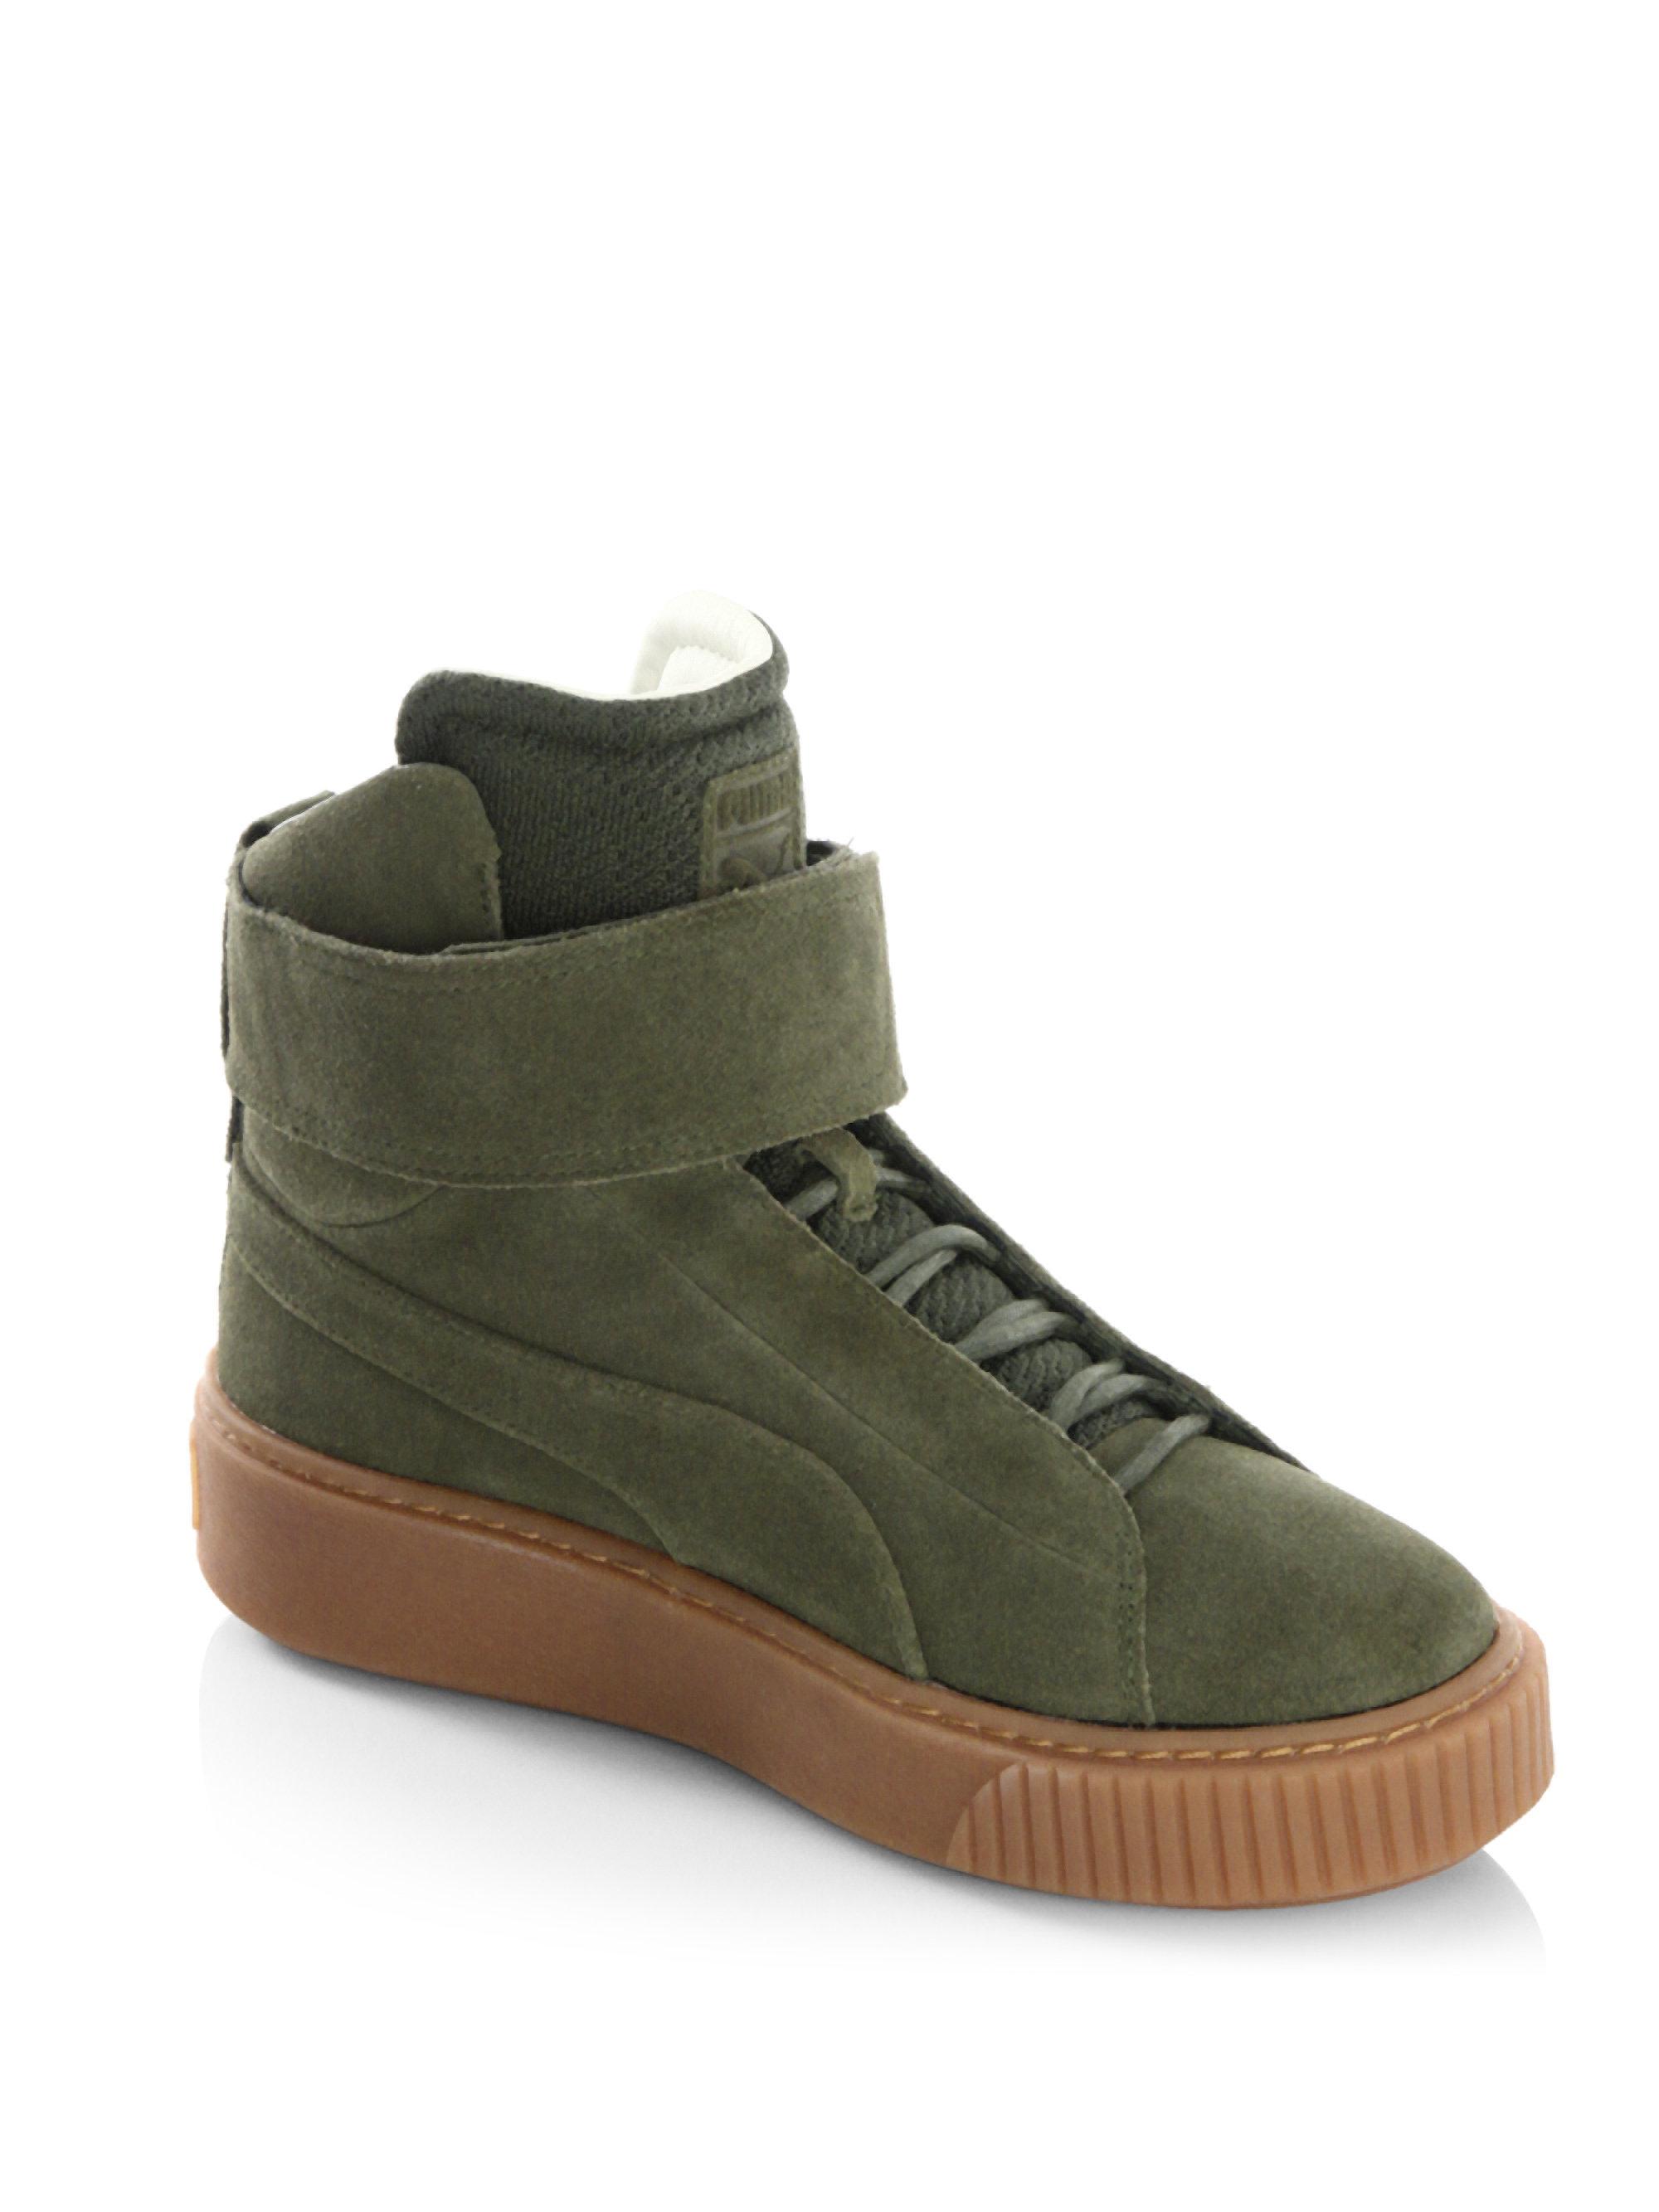 puma sneakers olive